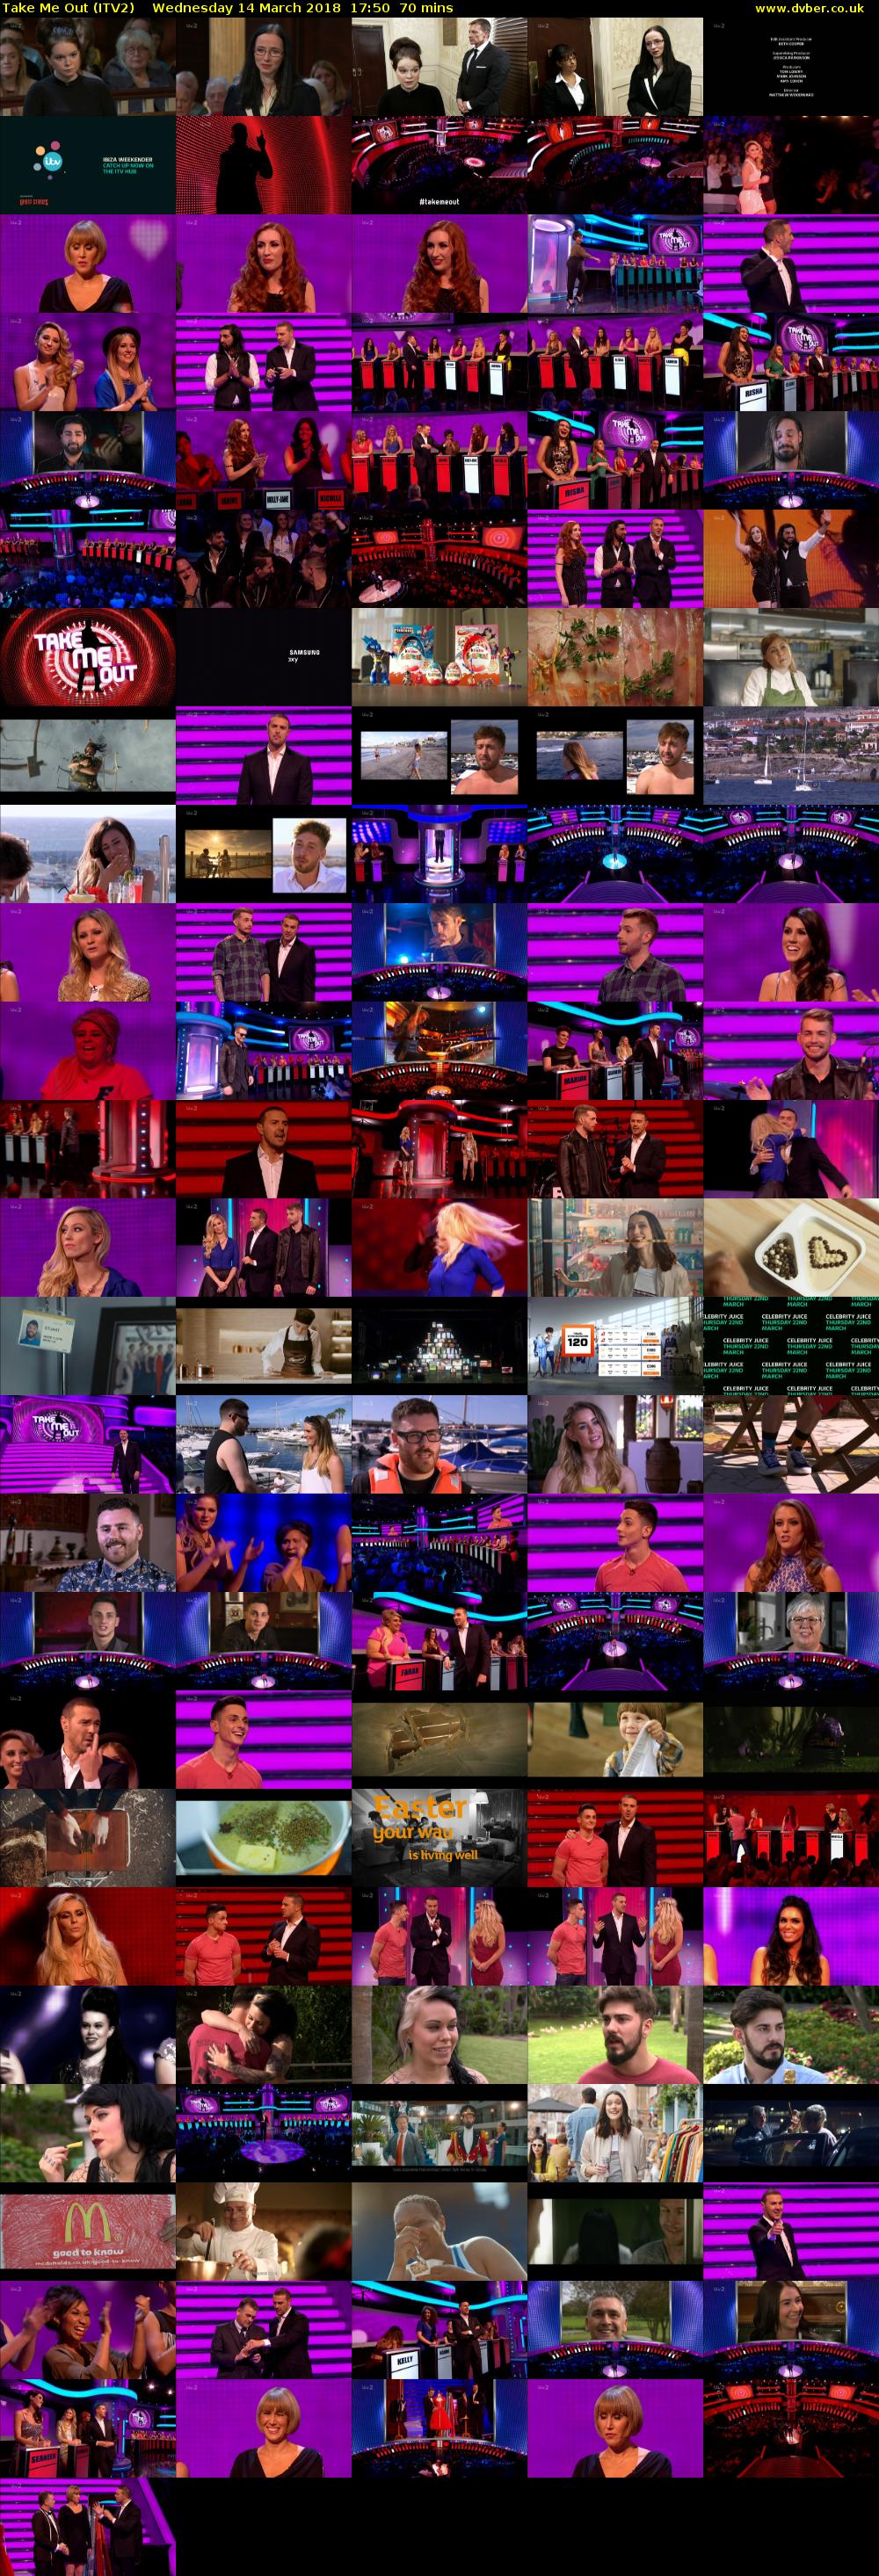 Take Me Out (ITV2) Wednesday 14 March 2018 17:50 - 19:00